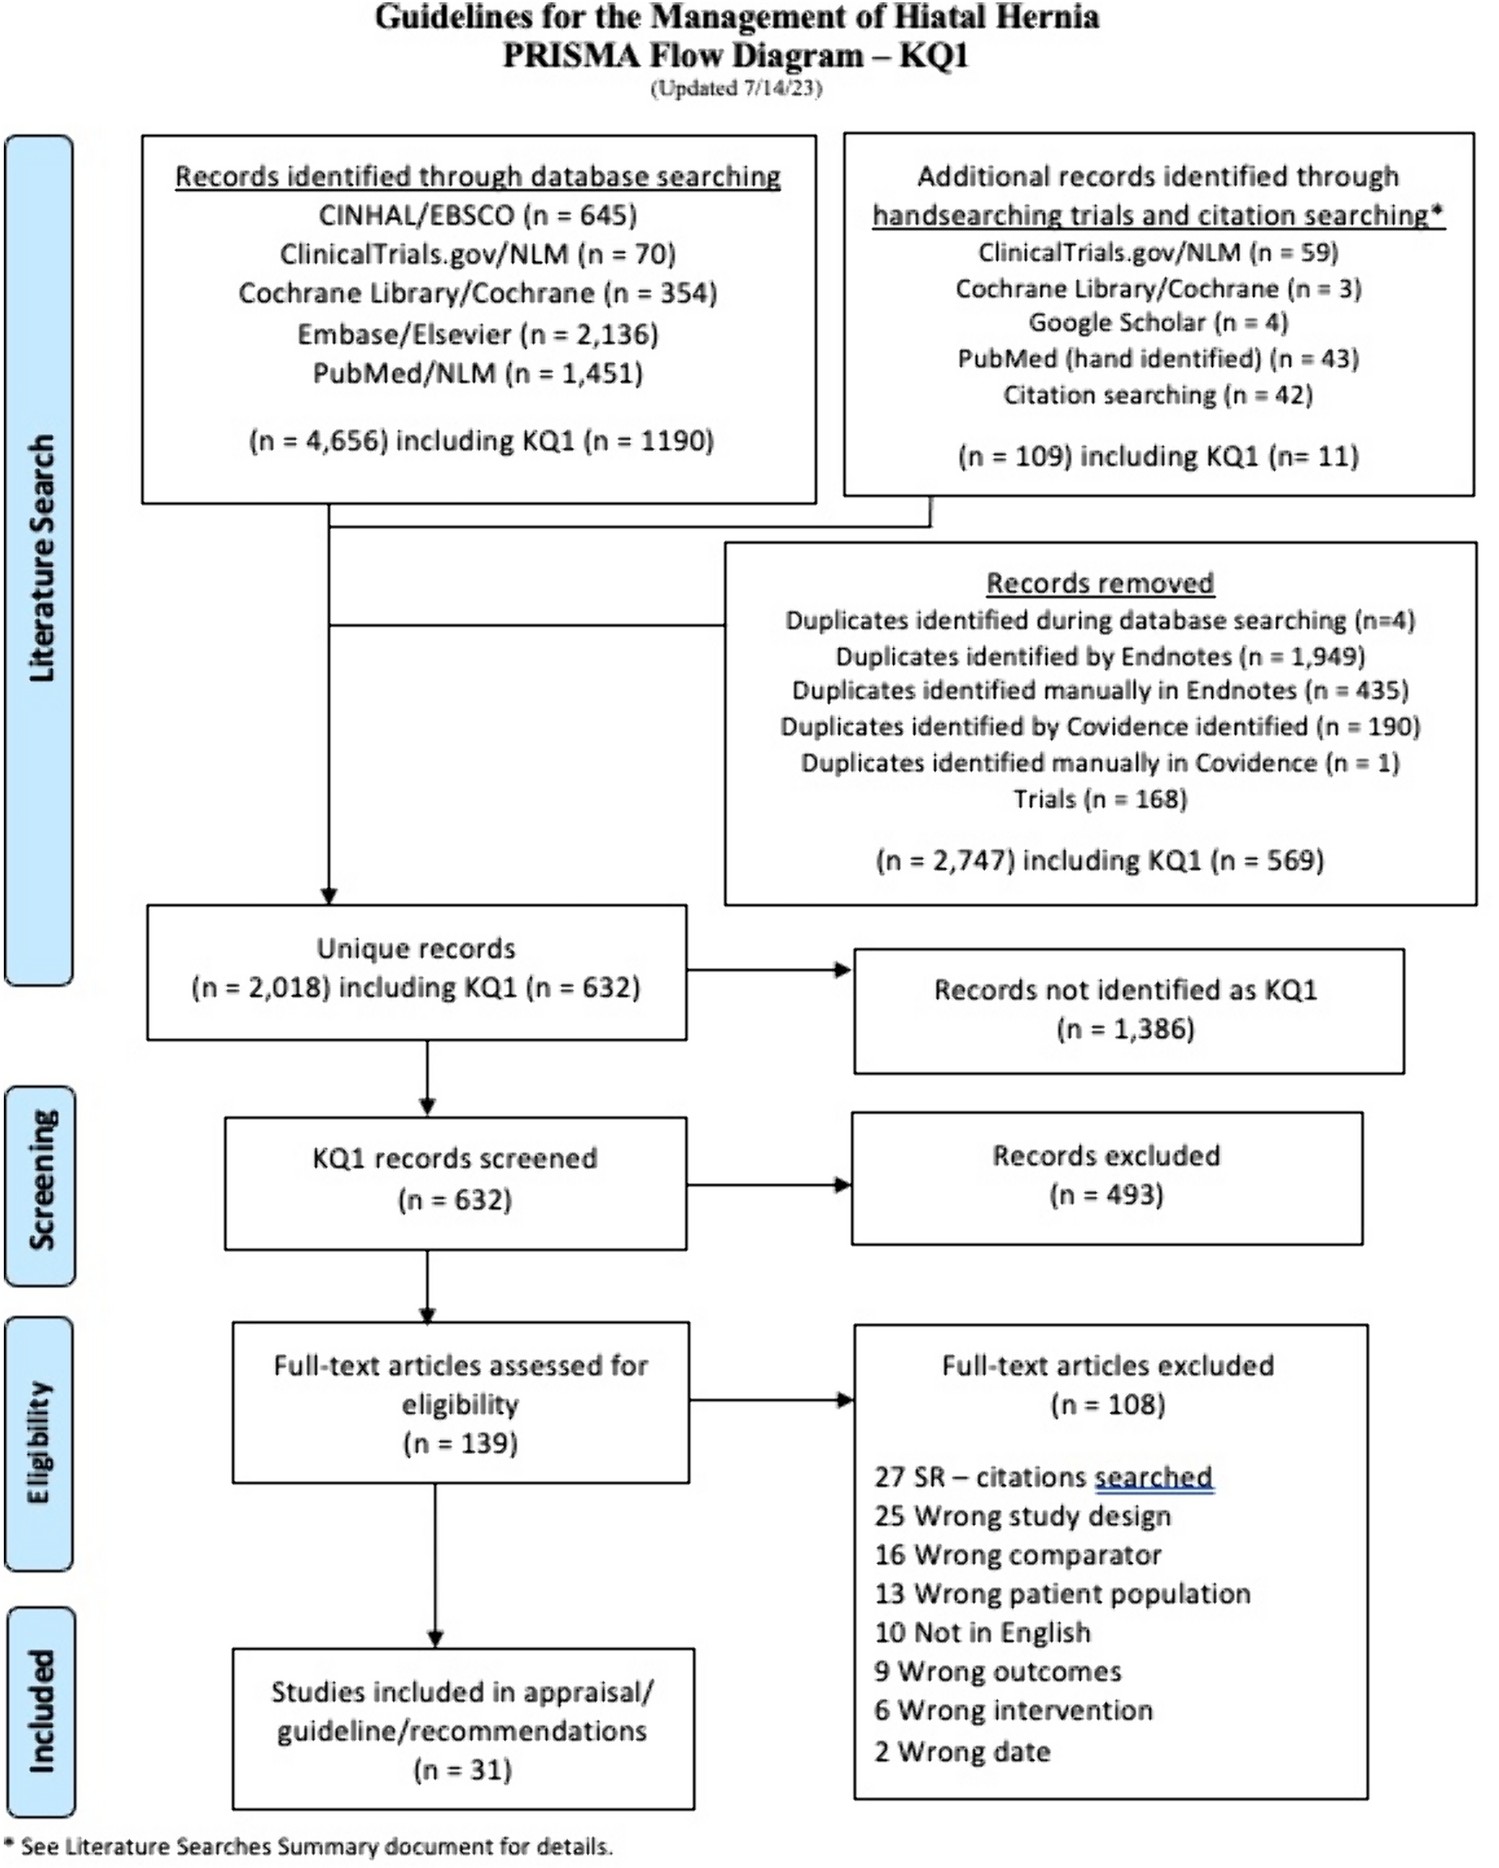 Management of symptomatic, asymptomatic, and recurrent hiatal hernia: a systematic review and meta-analysis